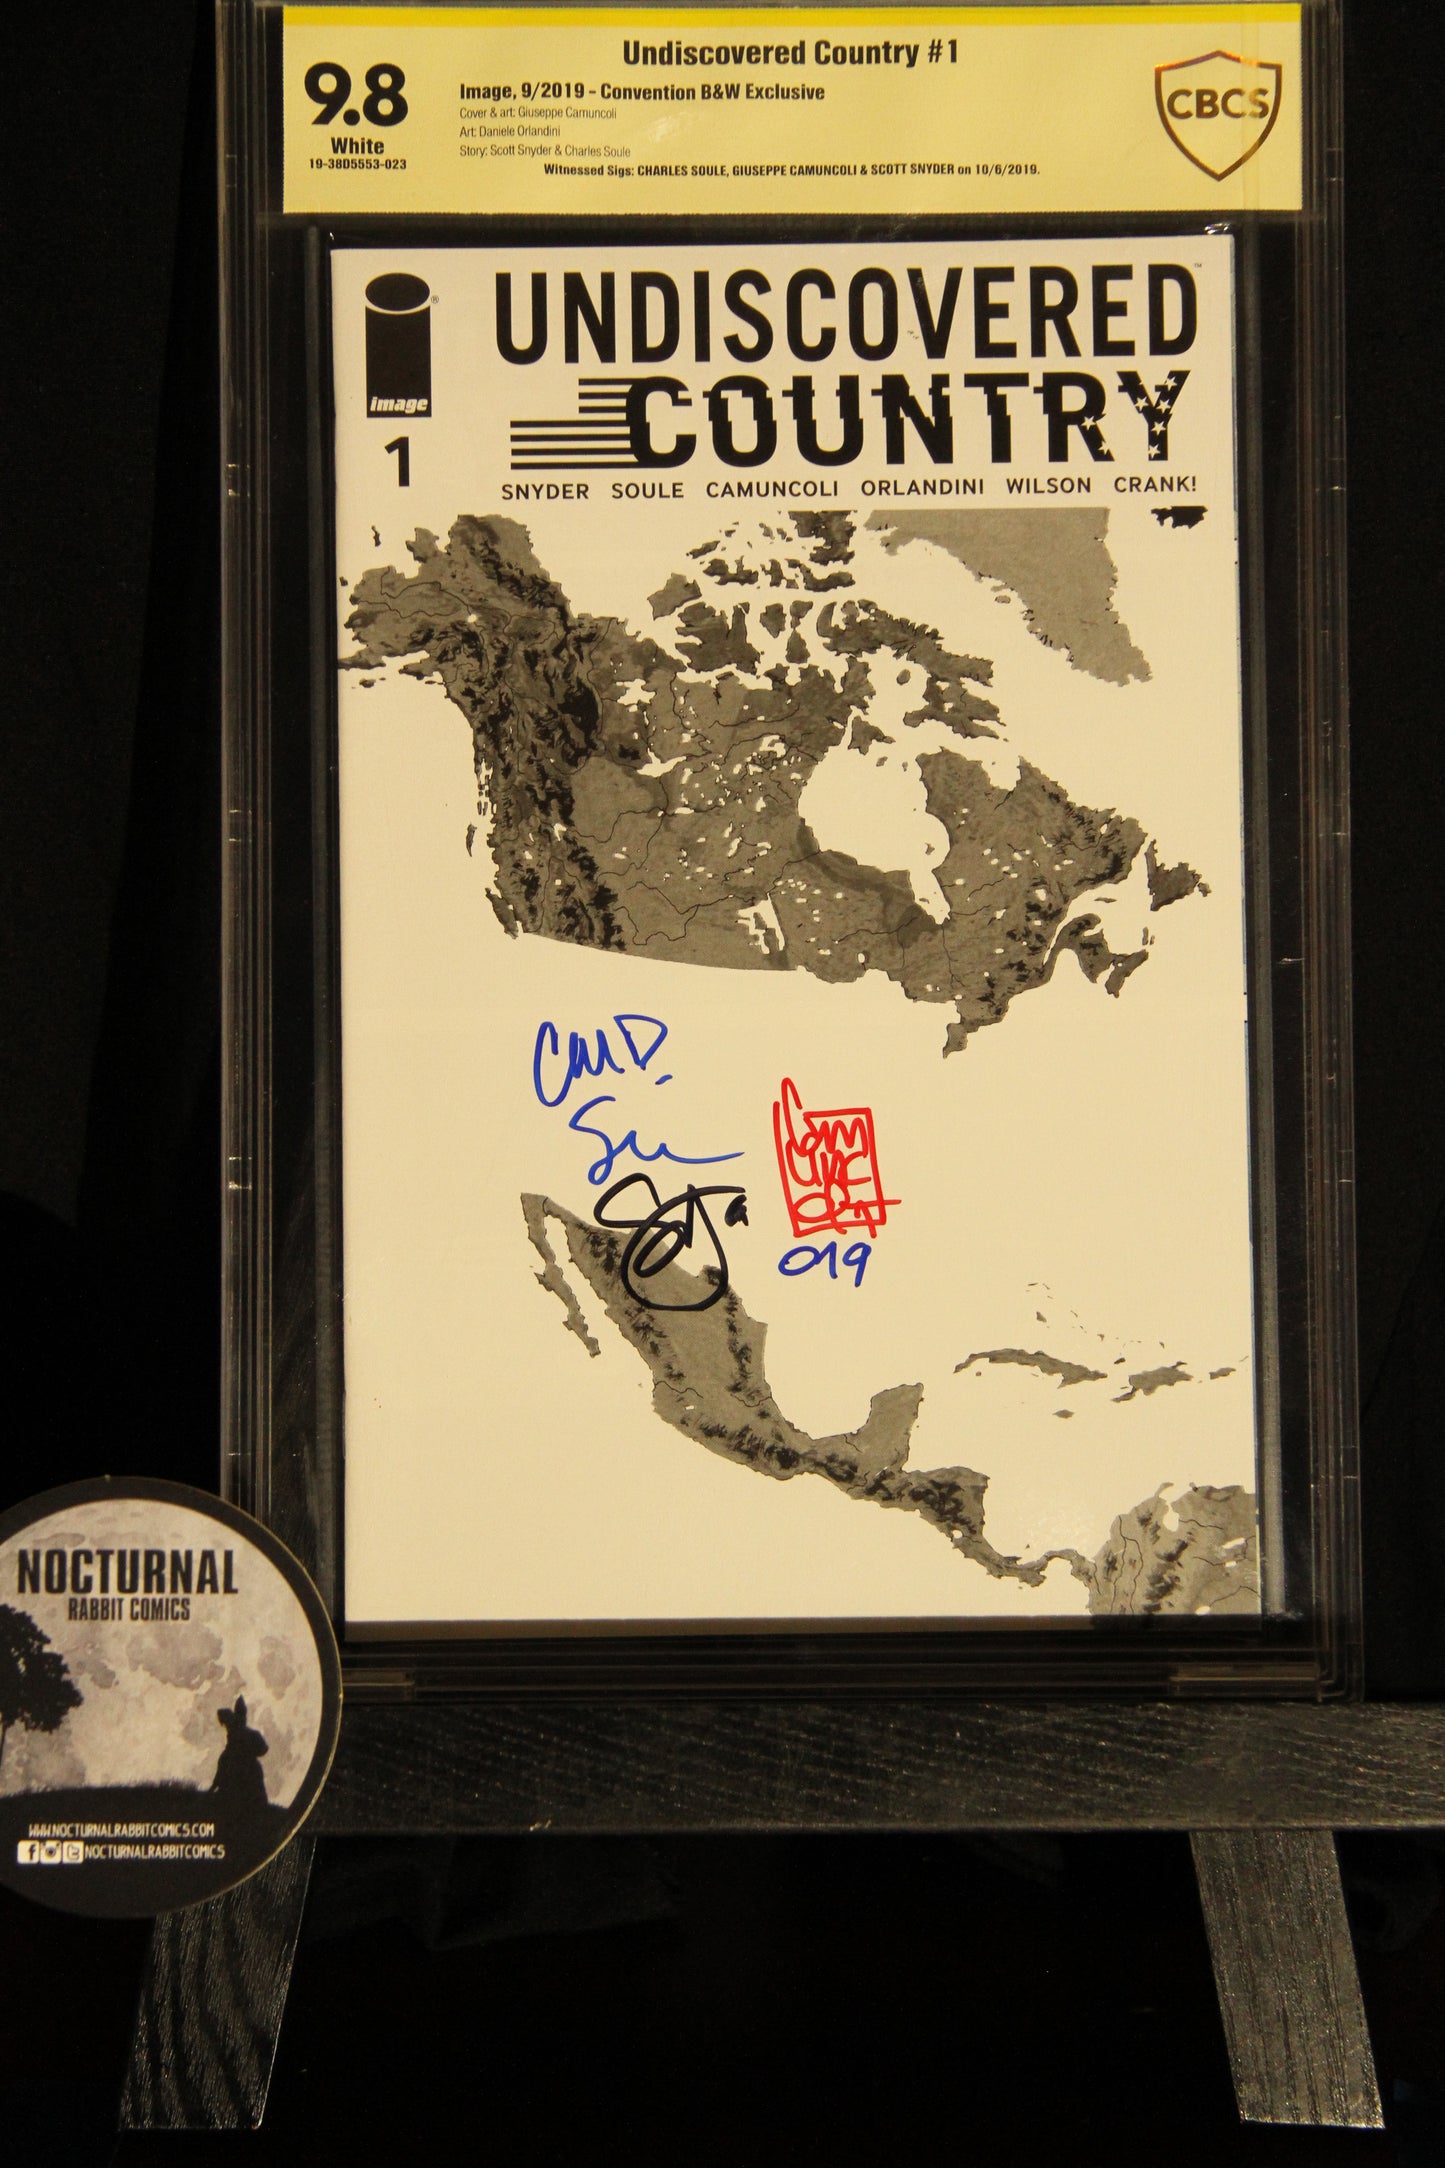 Undiscovered Country #1 NYCC B&W 9.8 CBCS Triple Signed